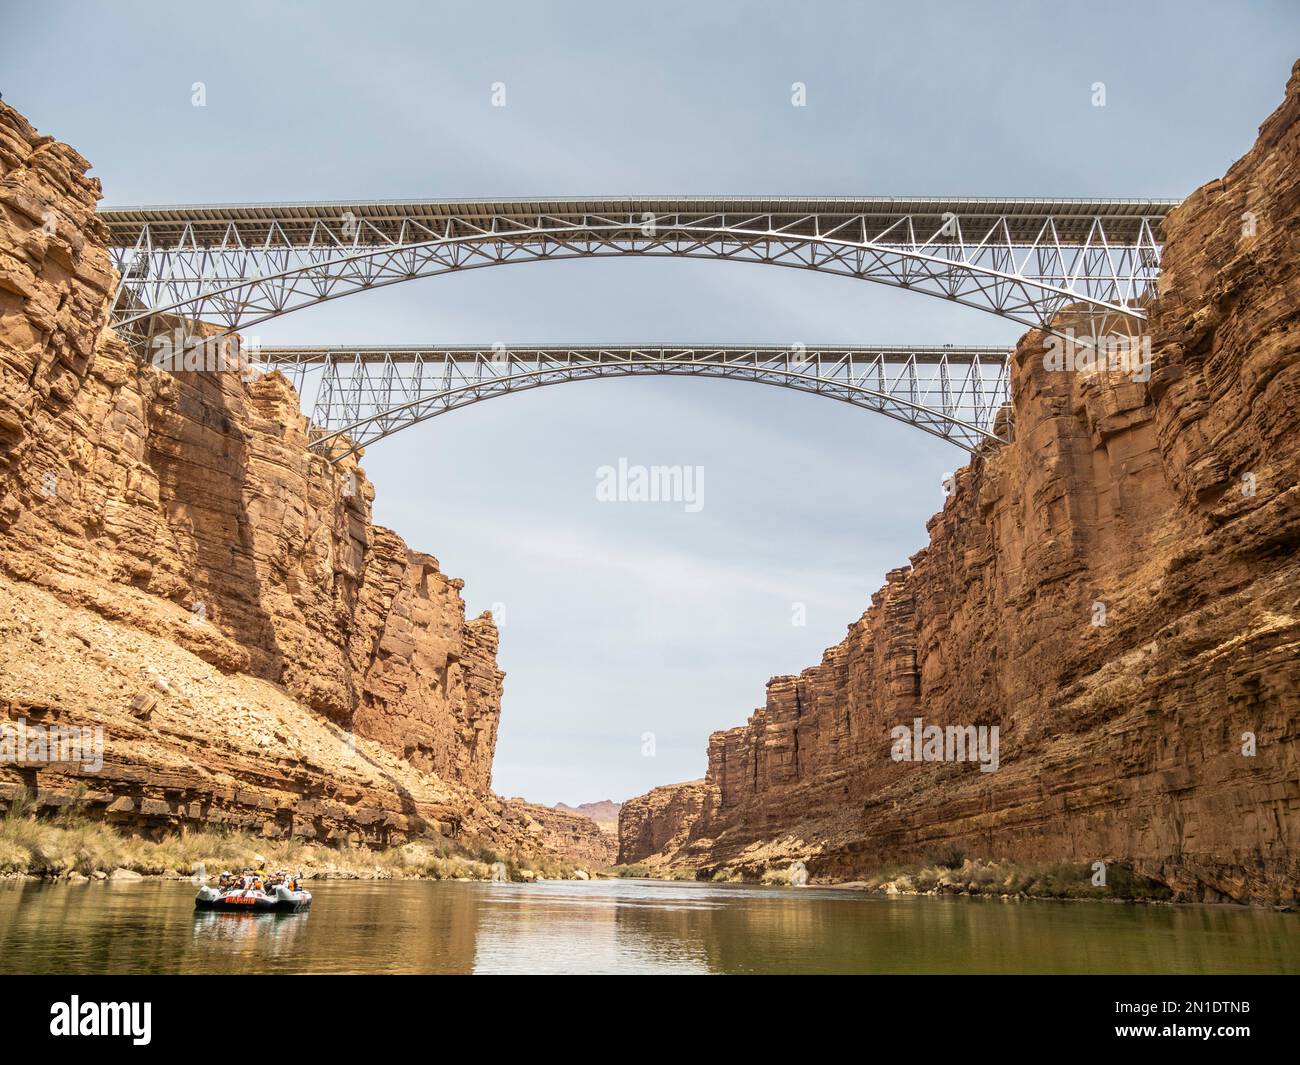 Navajo Bridges as seen from the Colorado River, Grand Canyon National Park, UNESCO World Heritage Site, Arizona, United States of America Stock Photo